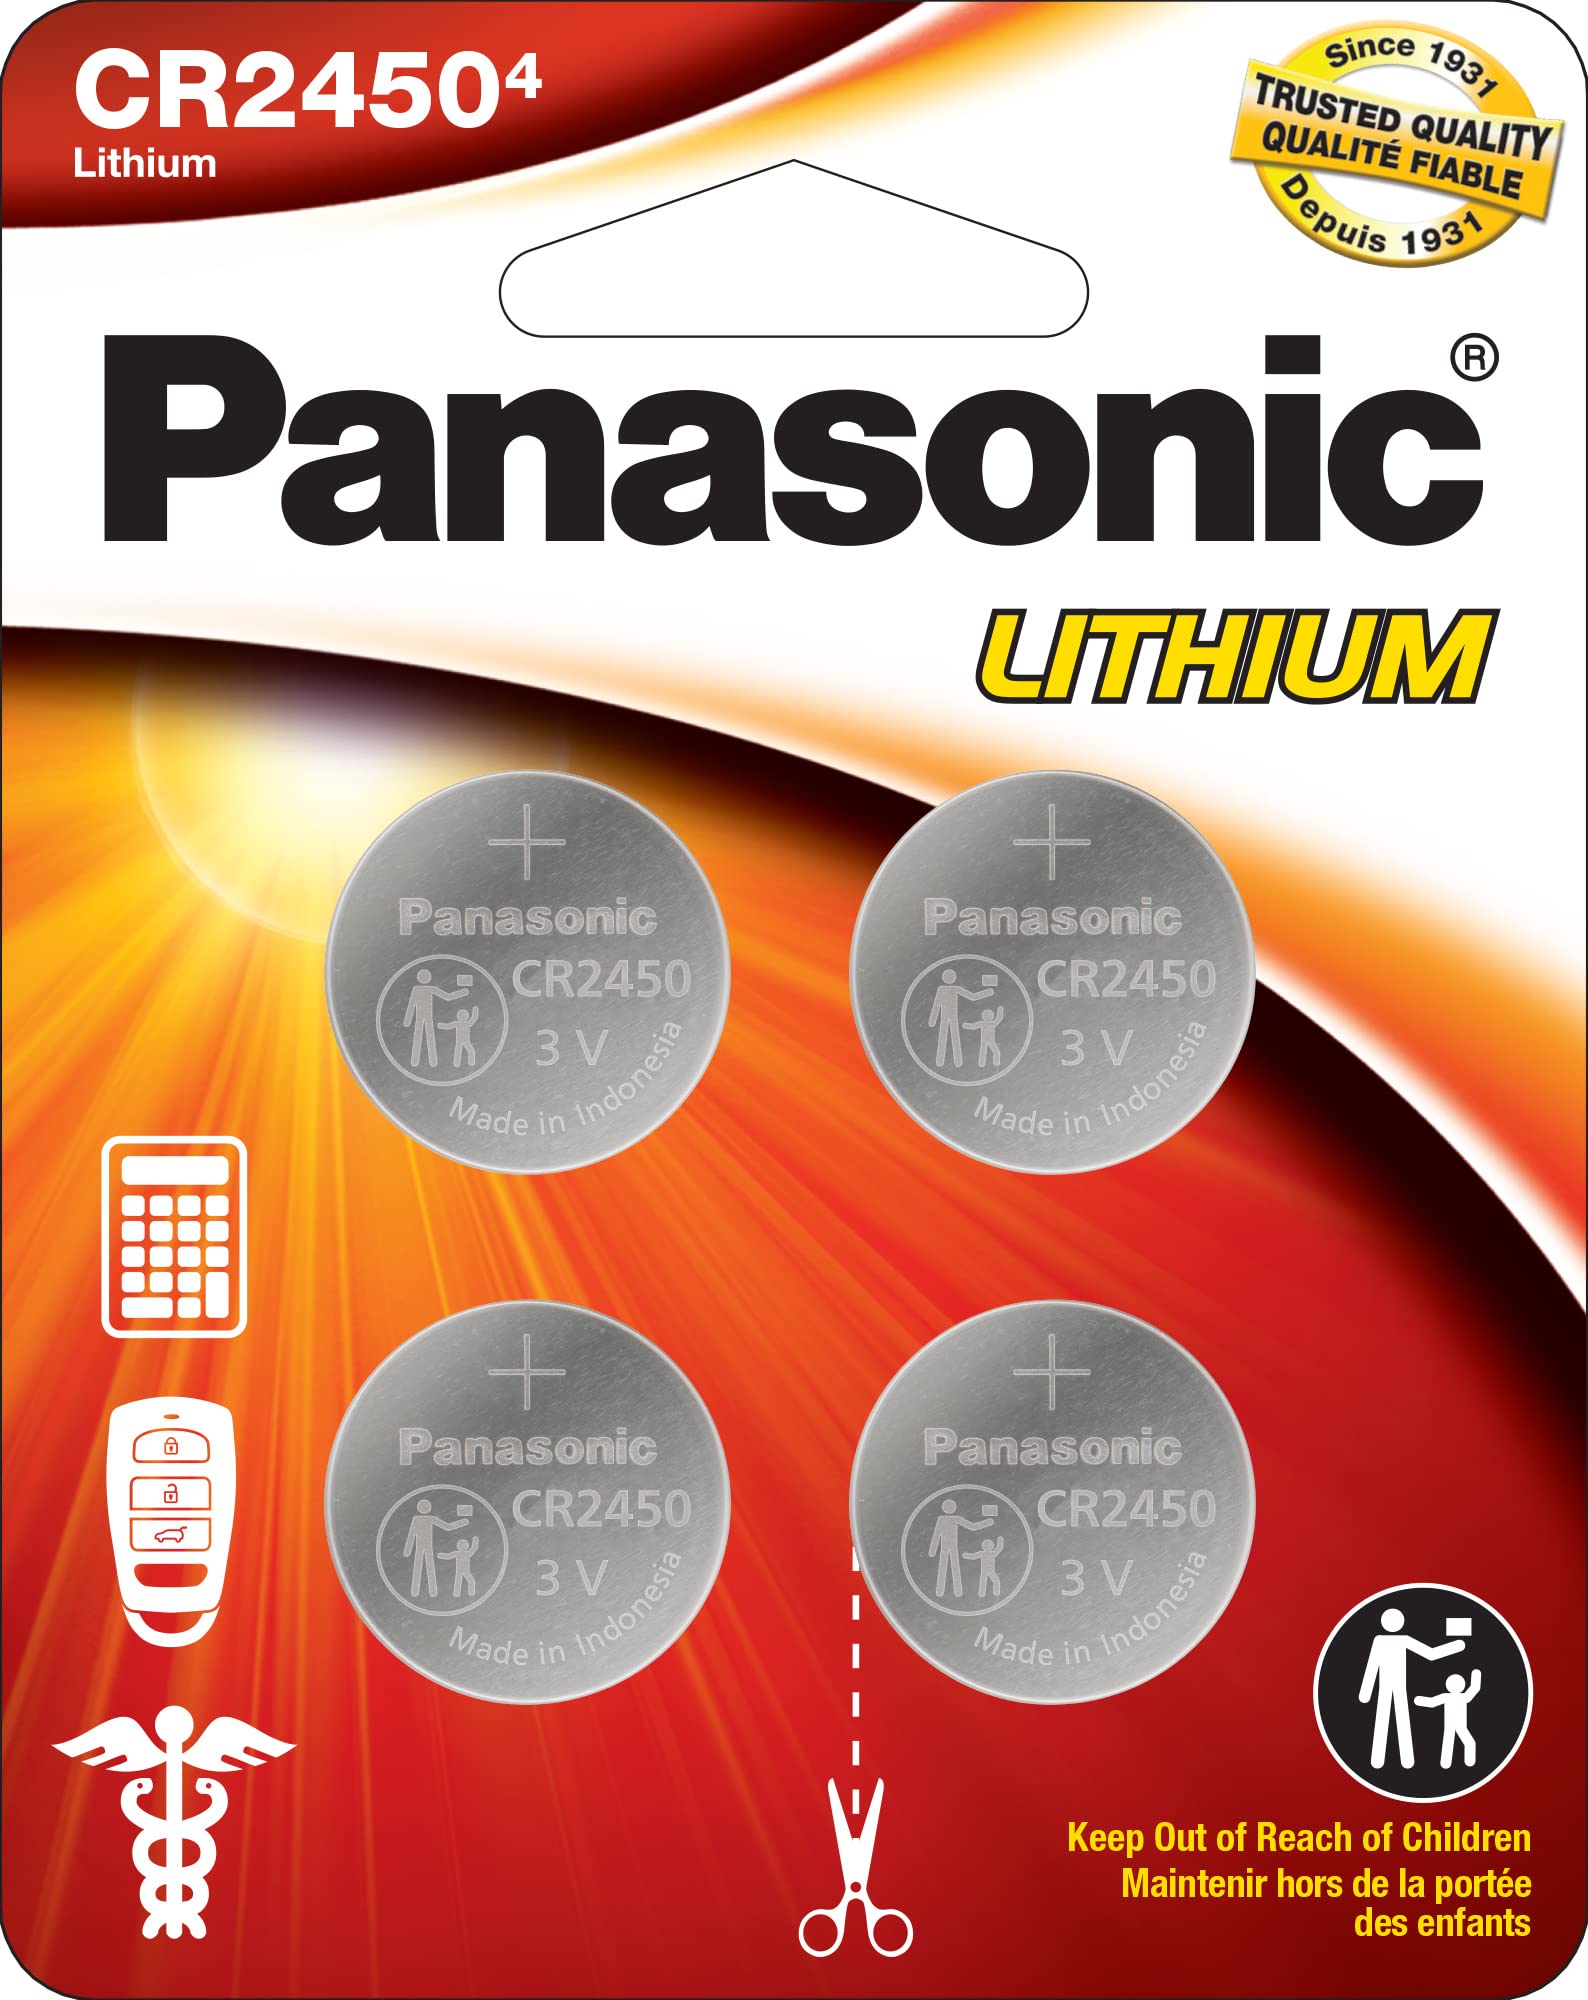 Panasonic CR2450 3.0 Volt Long Lasting Lithium Coin Cell Batteries in Child Resistant, Standards Based Packaging, 4-Battery Pack